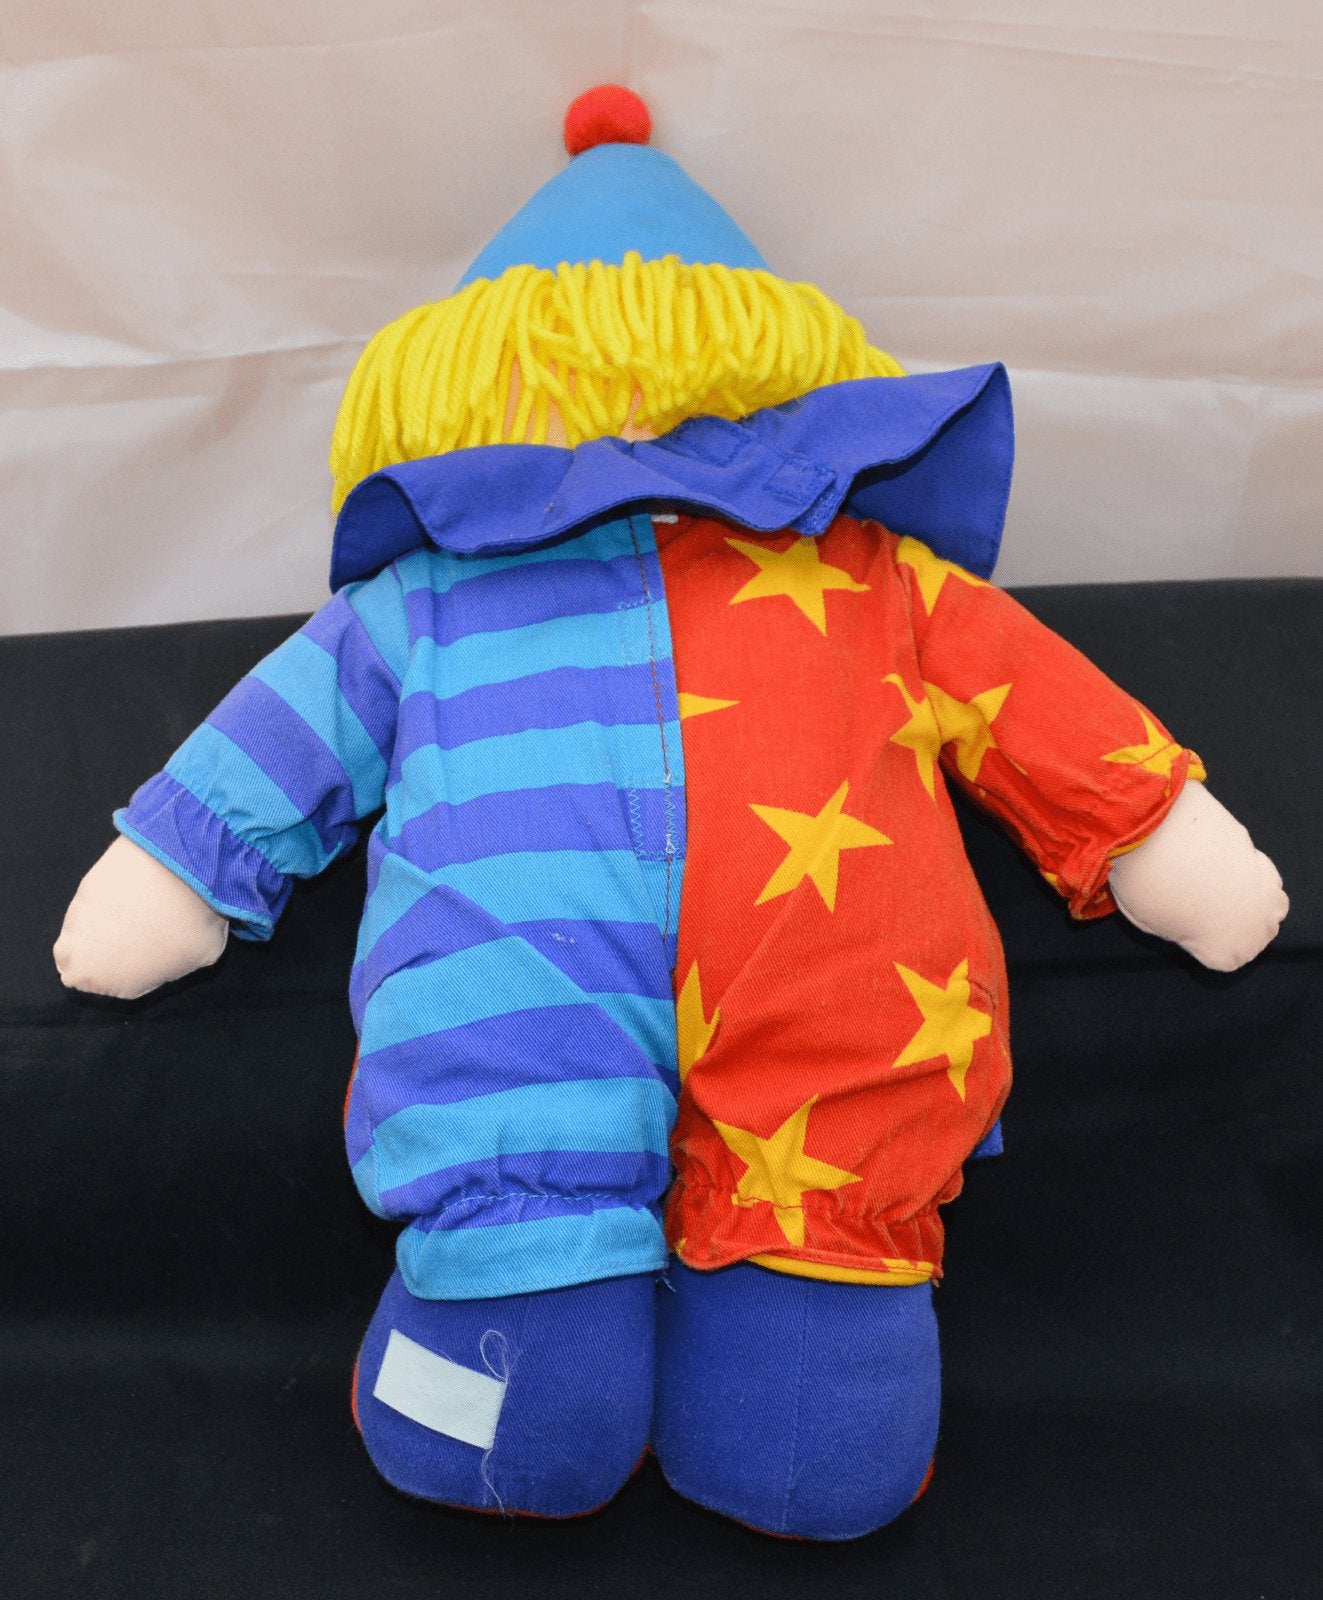 SOFT TOY LEARN TO DRESS CLOWN - TMD167207